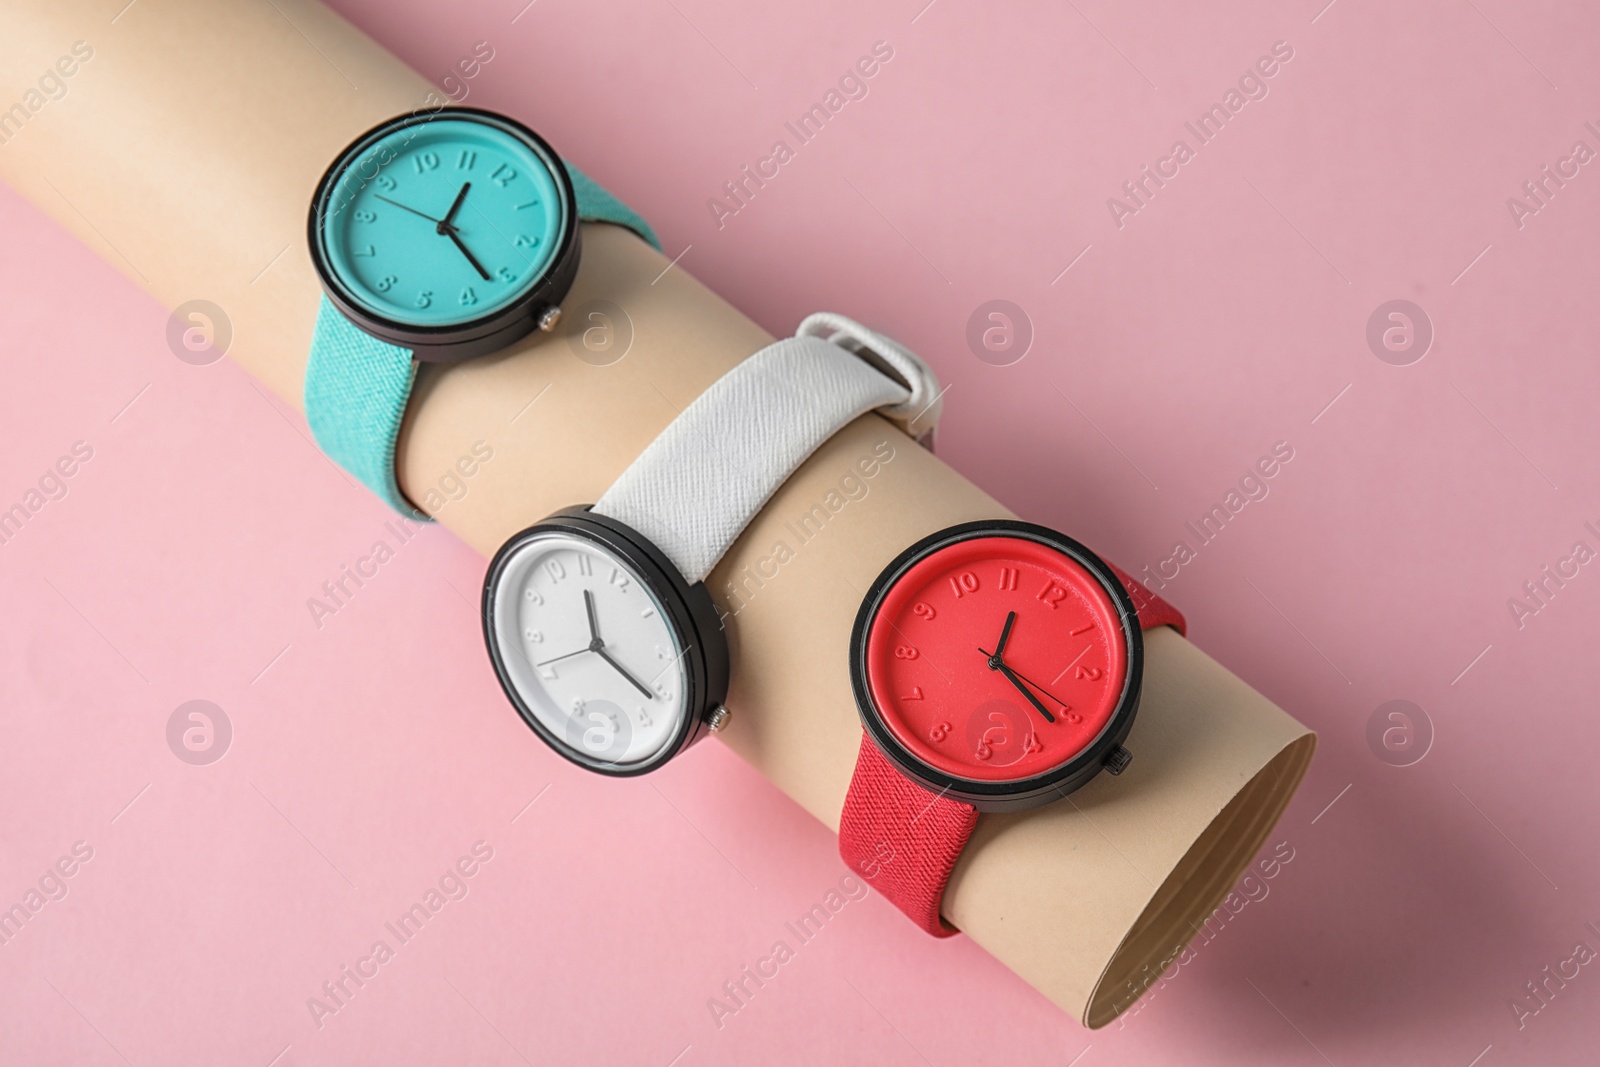 Photo of Holder with collection of stylish wrist watches on color background. Fashion accessory